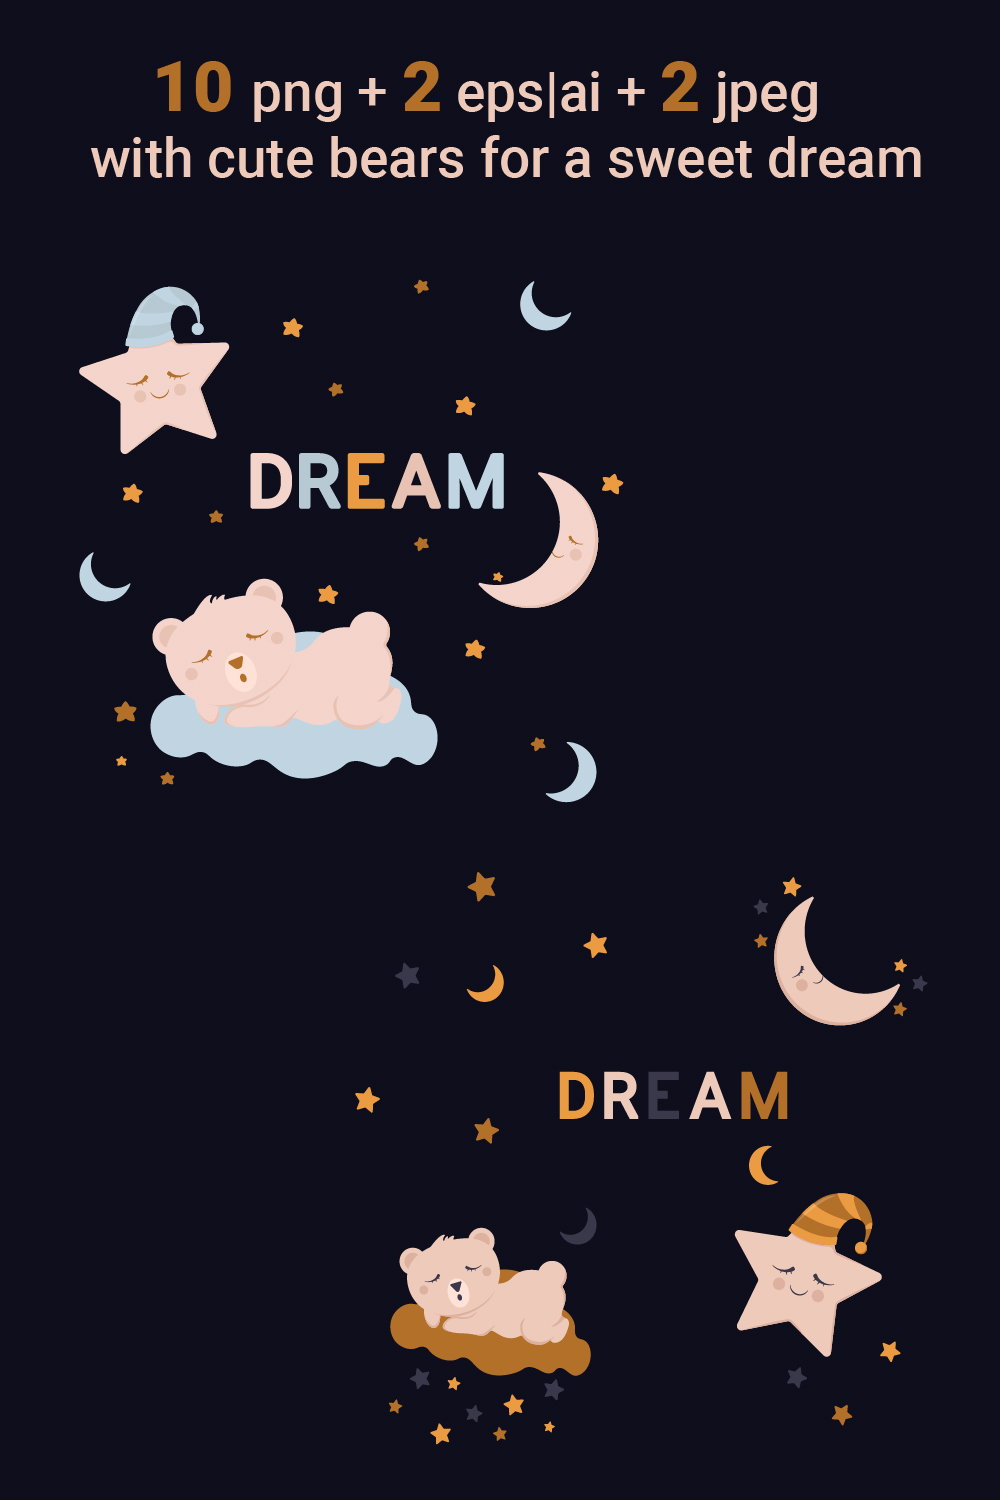 Children's illustration with cute sleeping bears, a moon and a star for a sweet dream pinterest preview image.